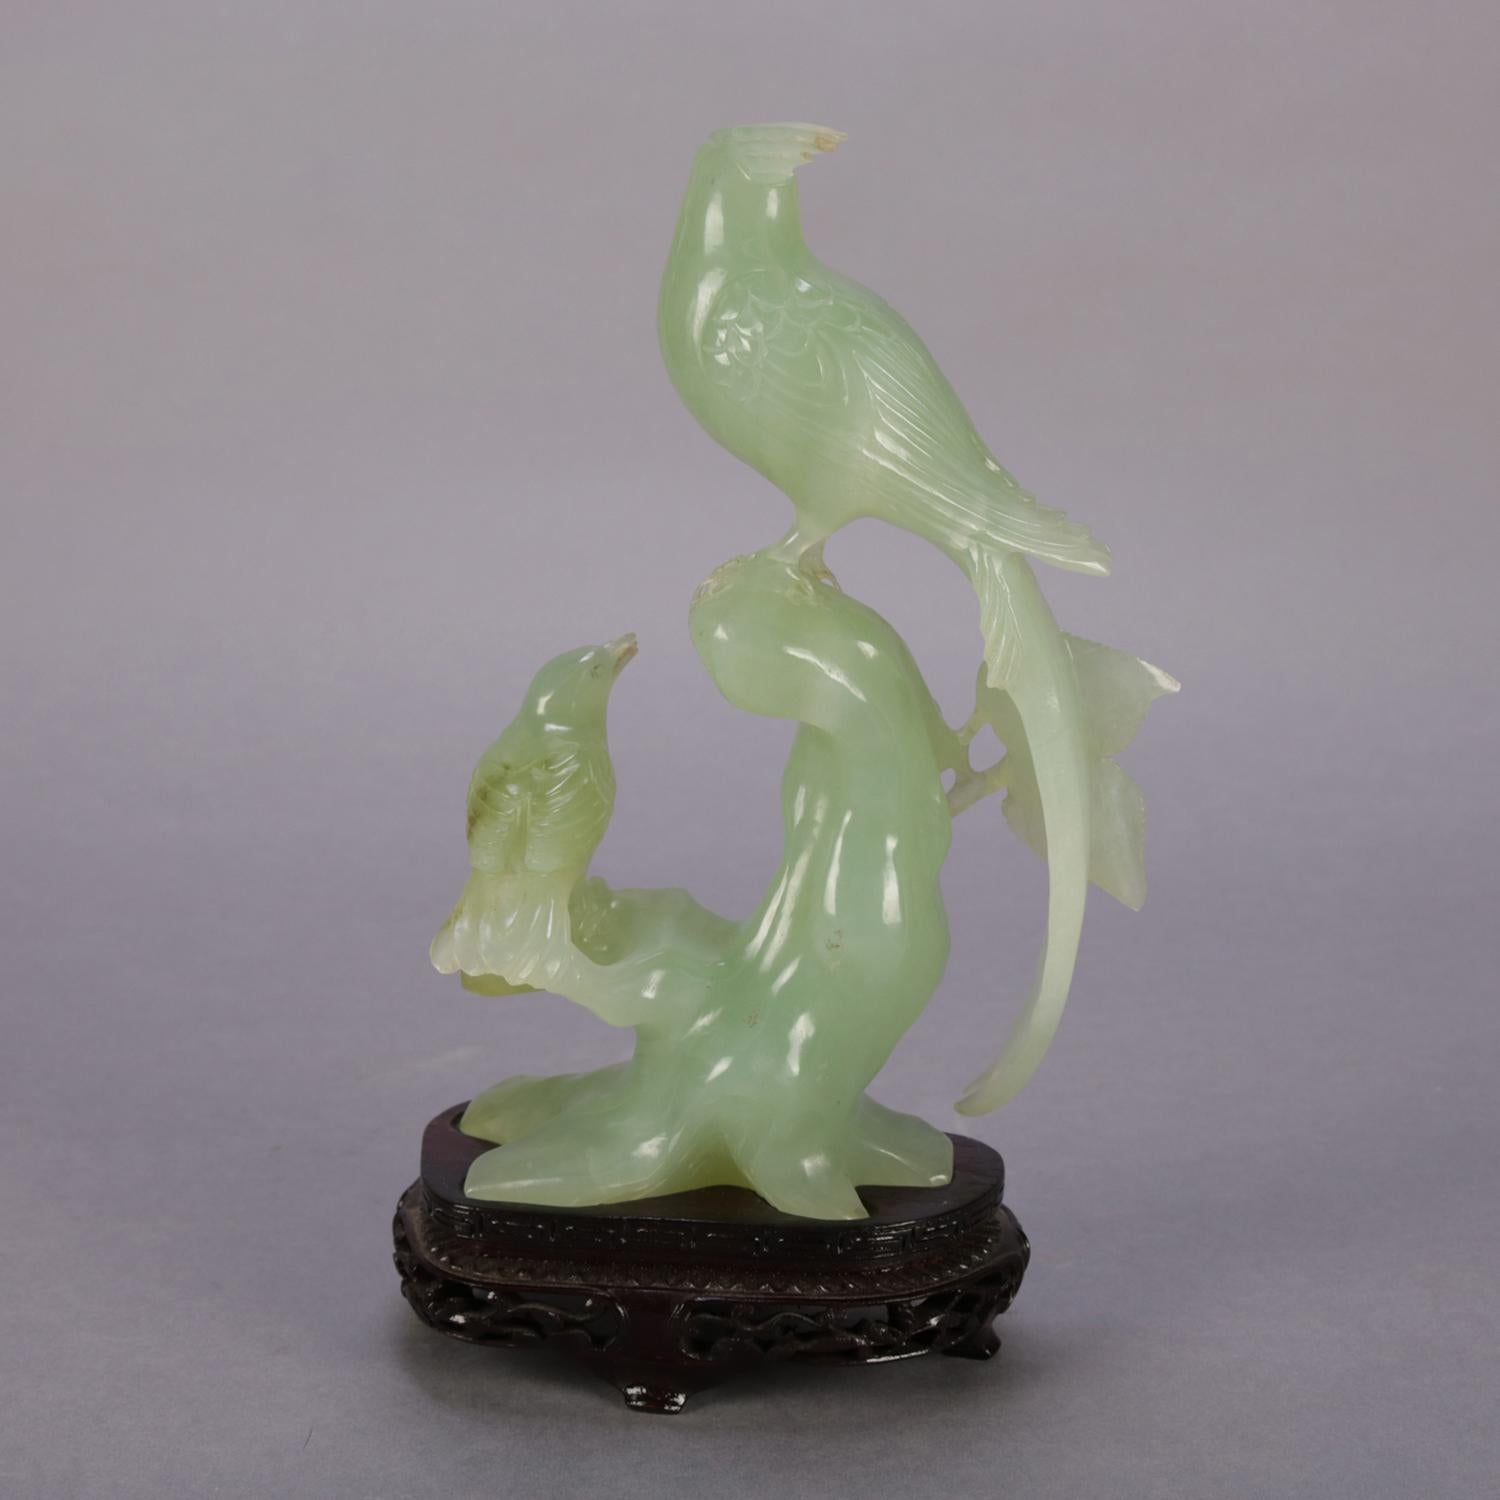 Chinese carved jade figural sculpture grouping of pheasant and sparrow (birds) on branch and seated on carved hardwood stand, 20th century

Measures: 9